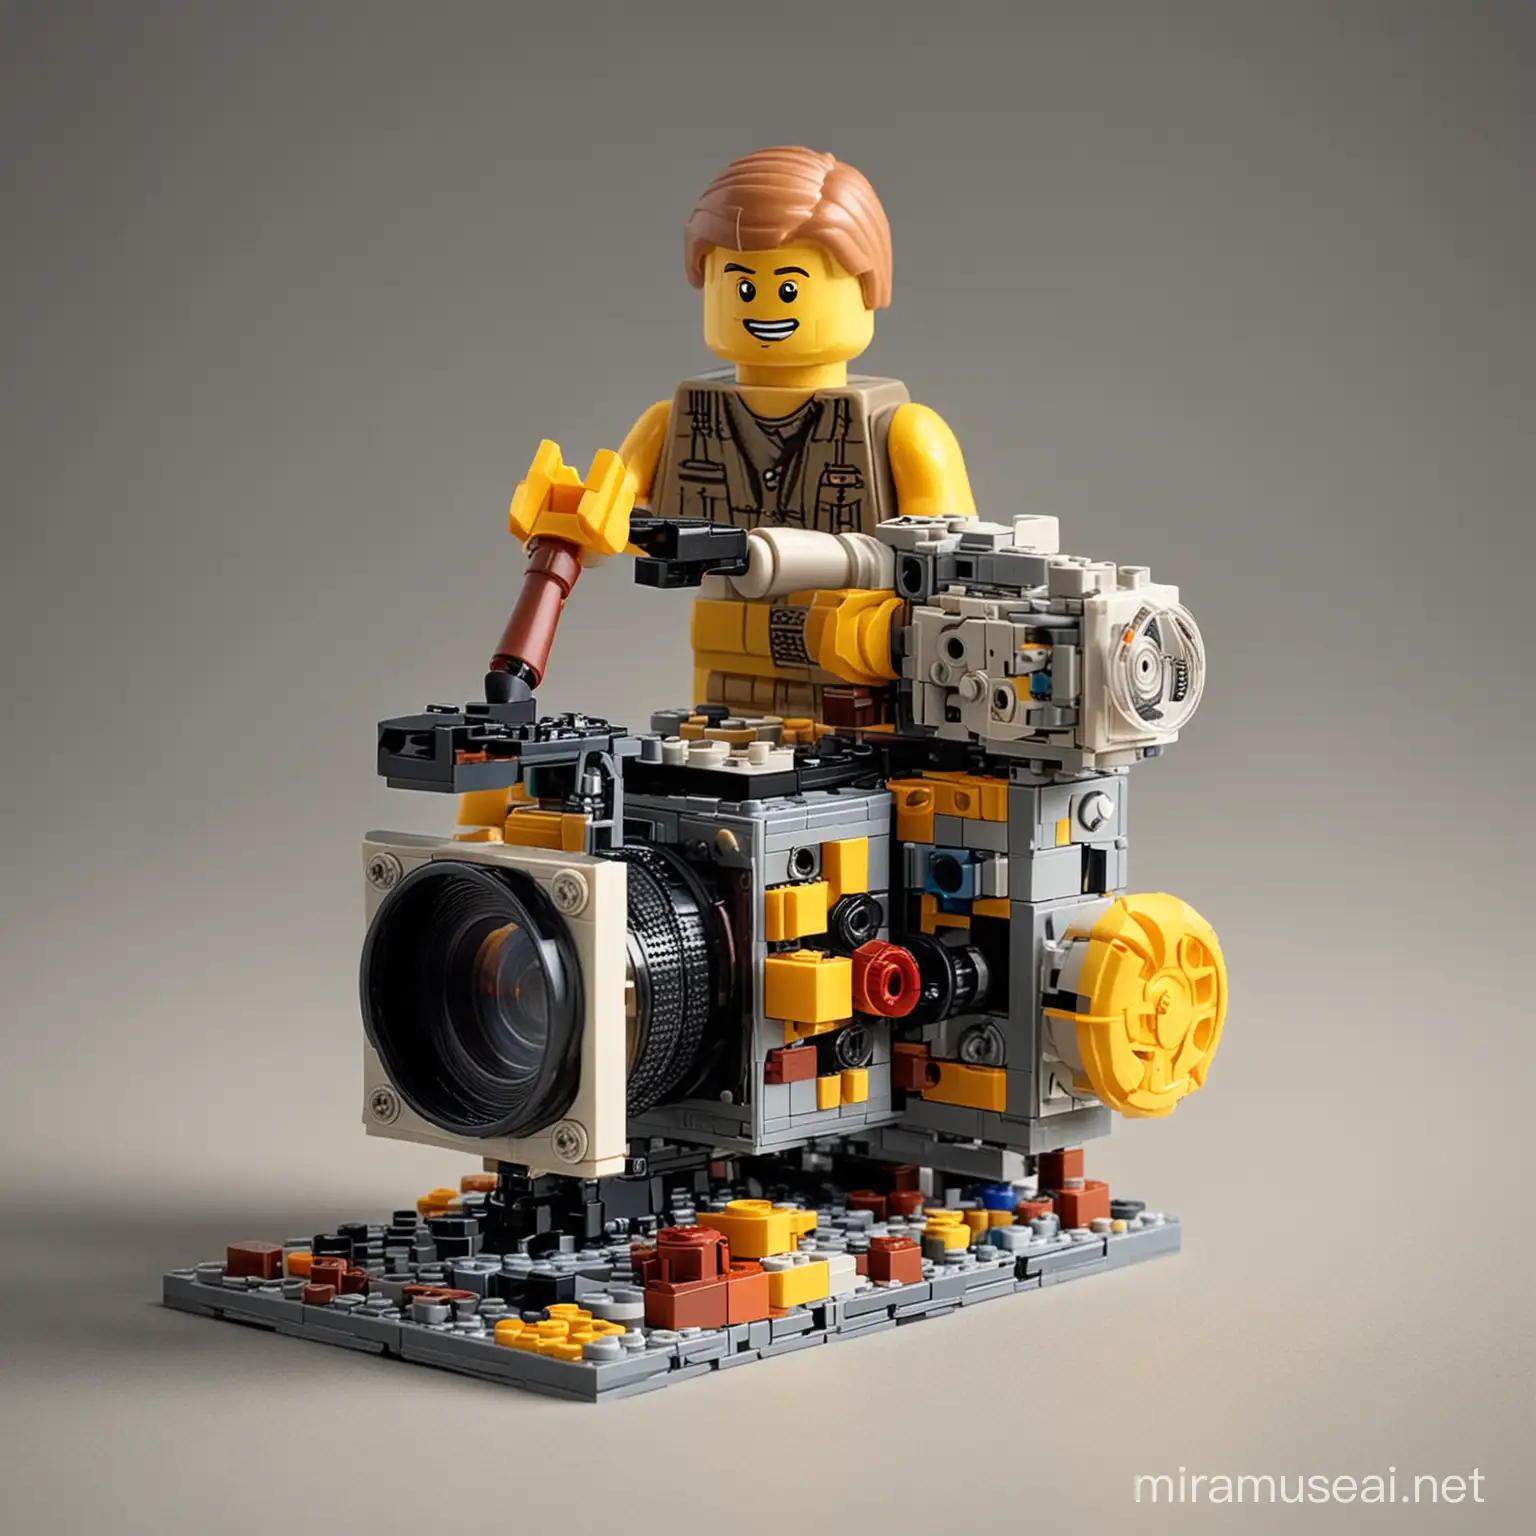 LEGO Bricks Assembled into a Video Camera by a Professional Worker